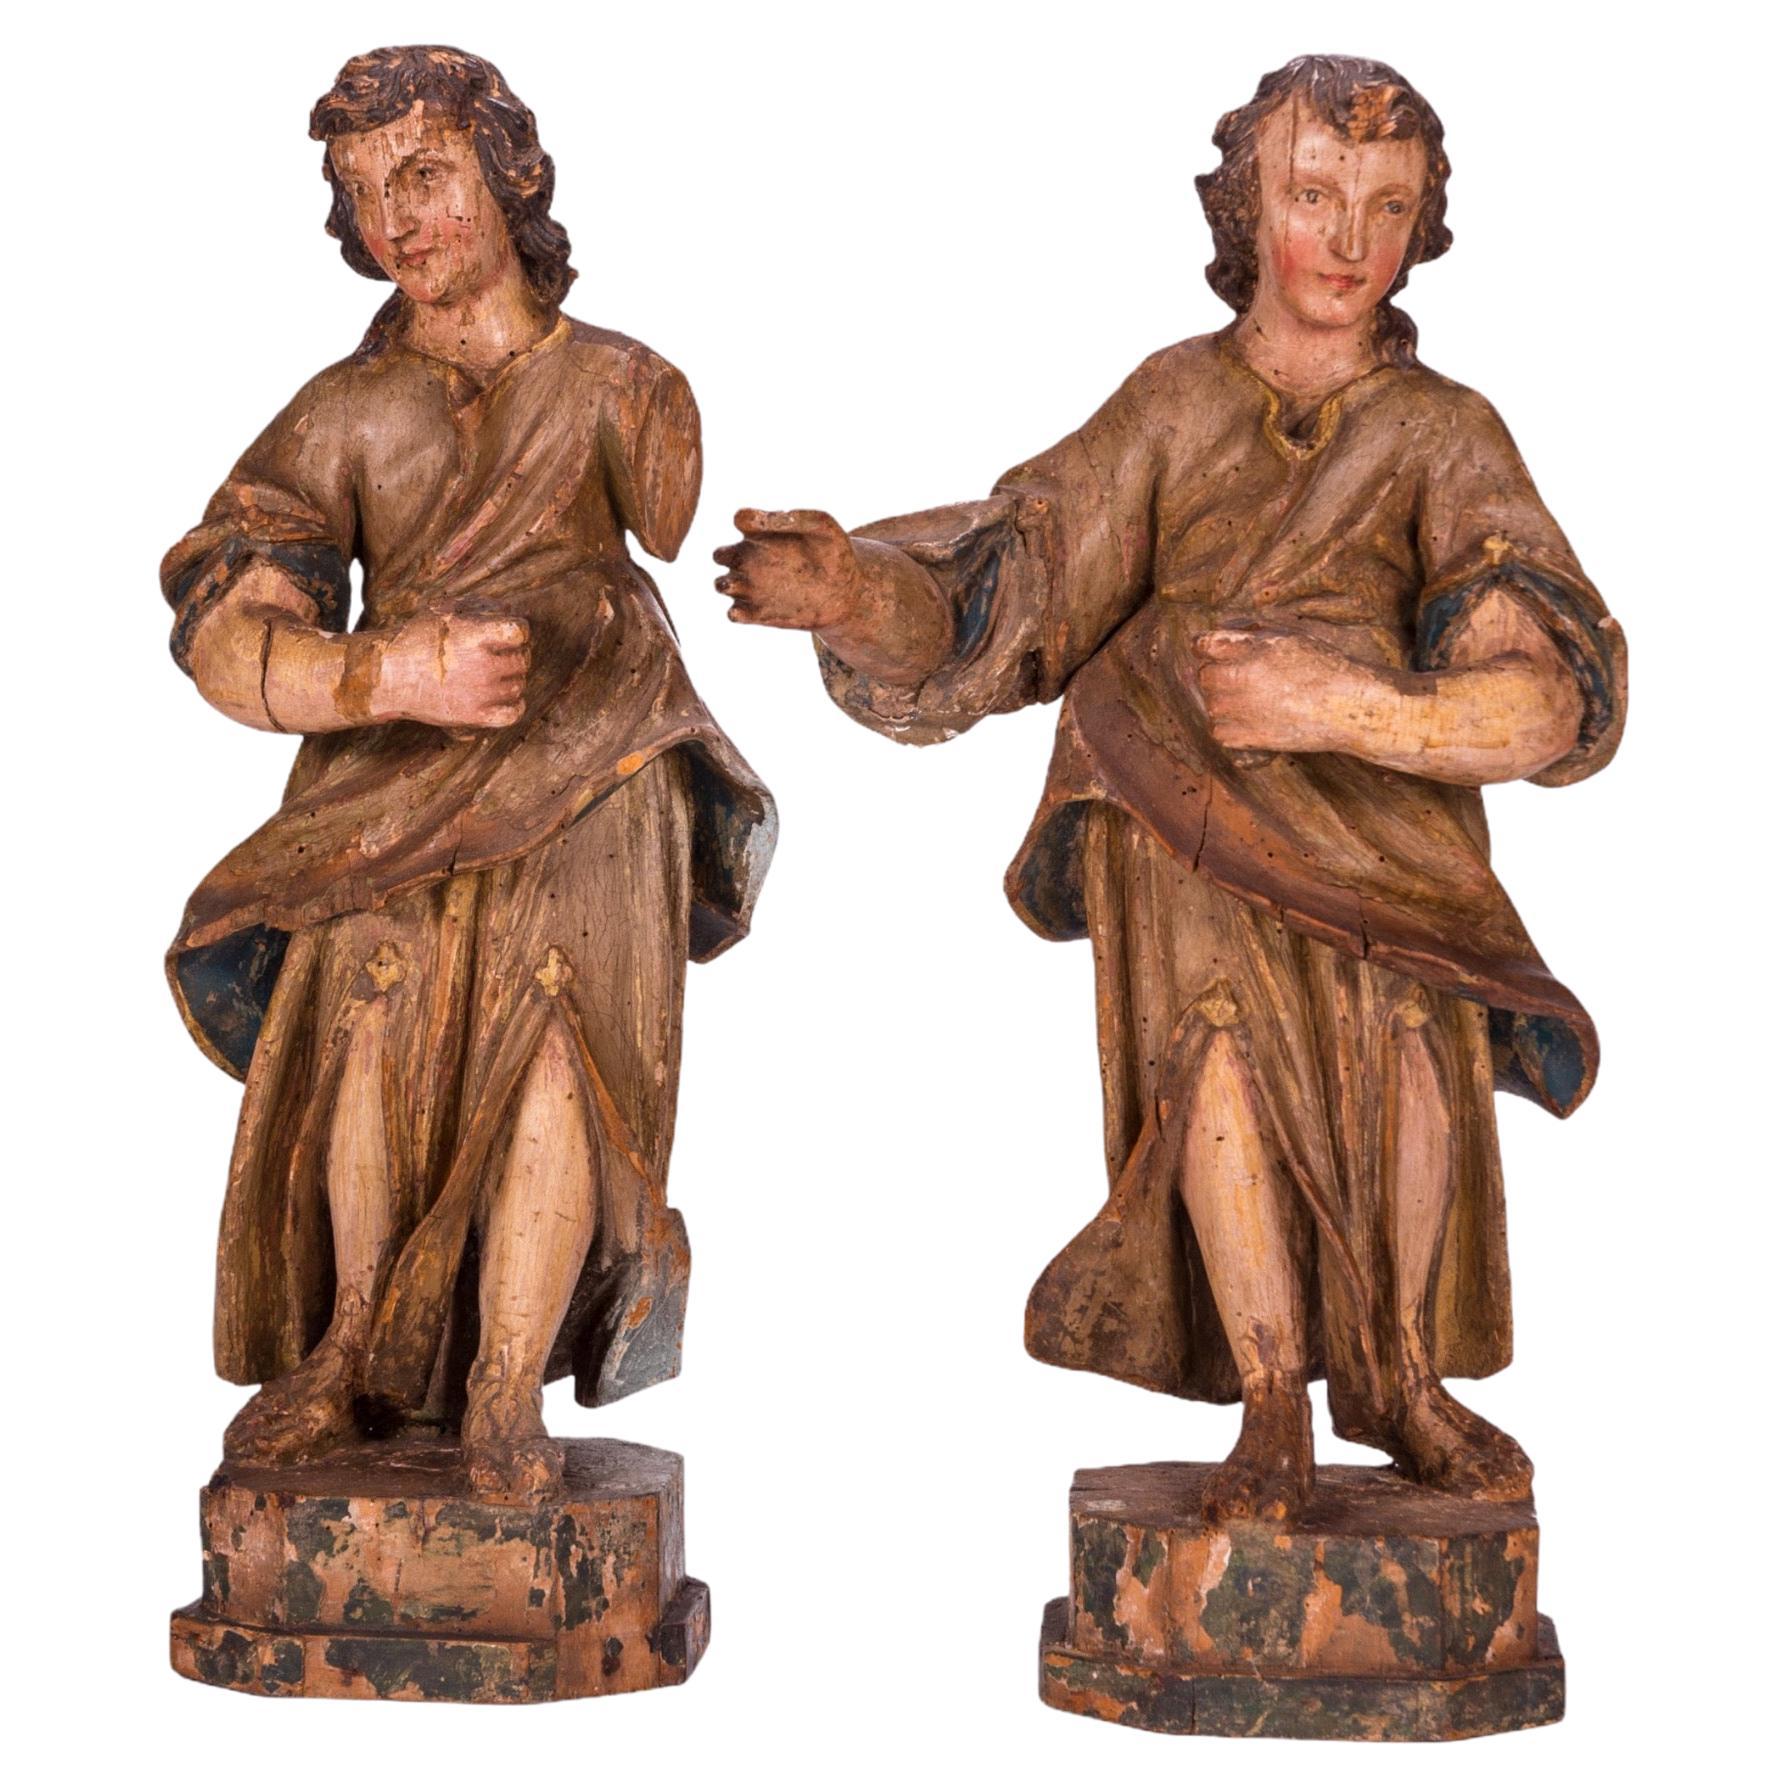 Angelic Carved Wood Sculptures, 16th Century